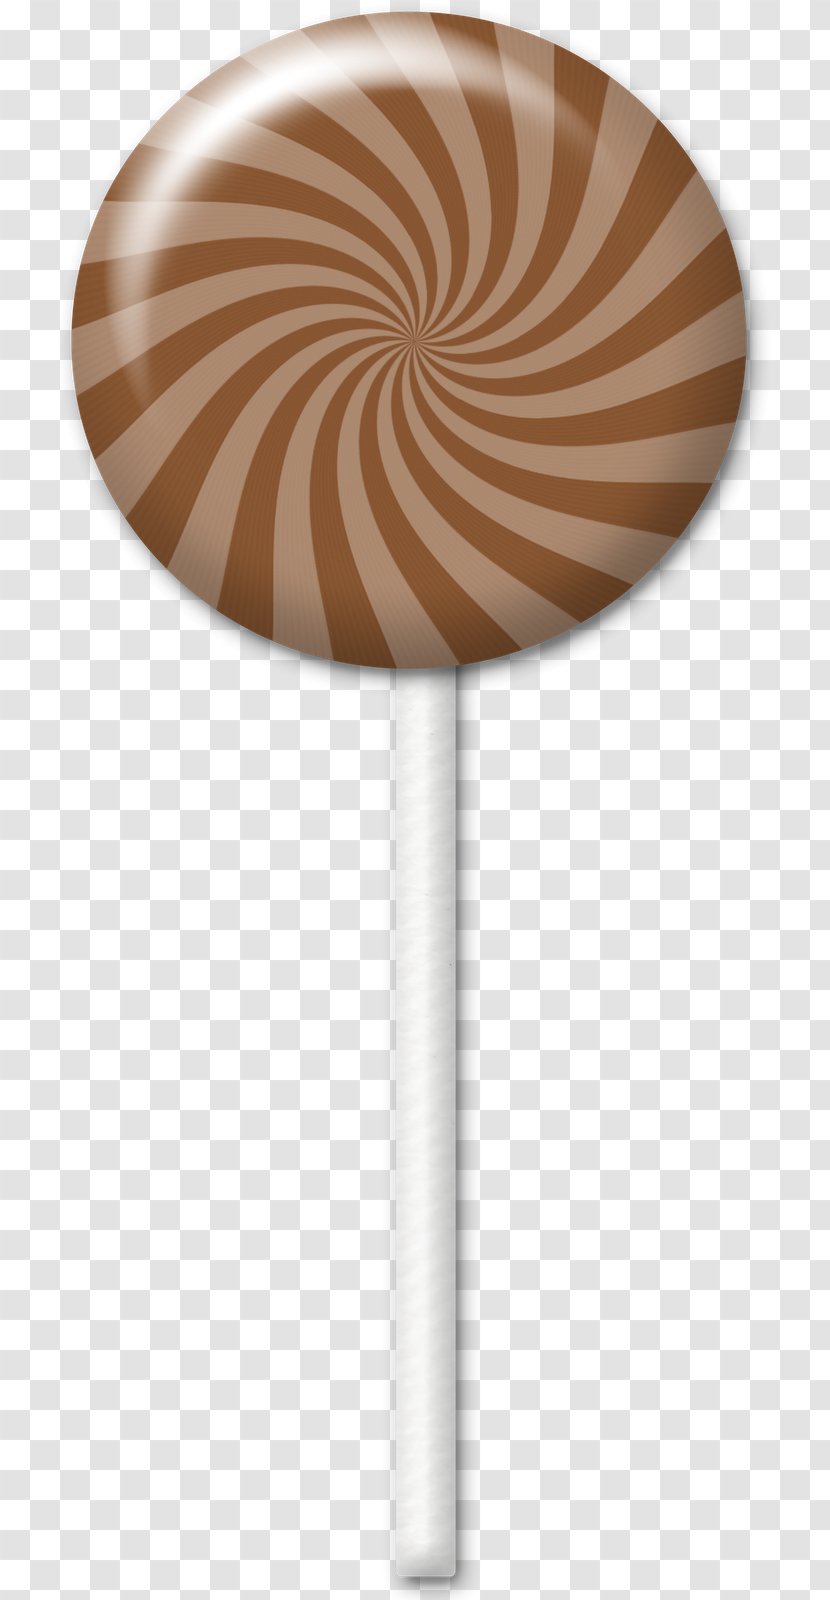 Lollipop Candy Cane Chocolate Ice Cream Frosting & Icing - Cake Transparent PNG